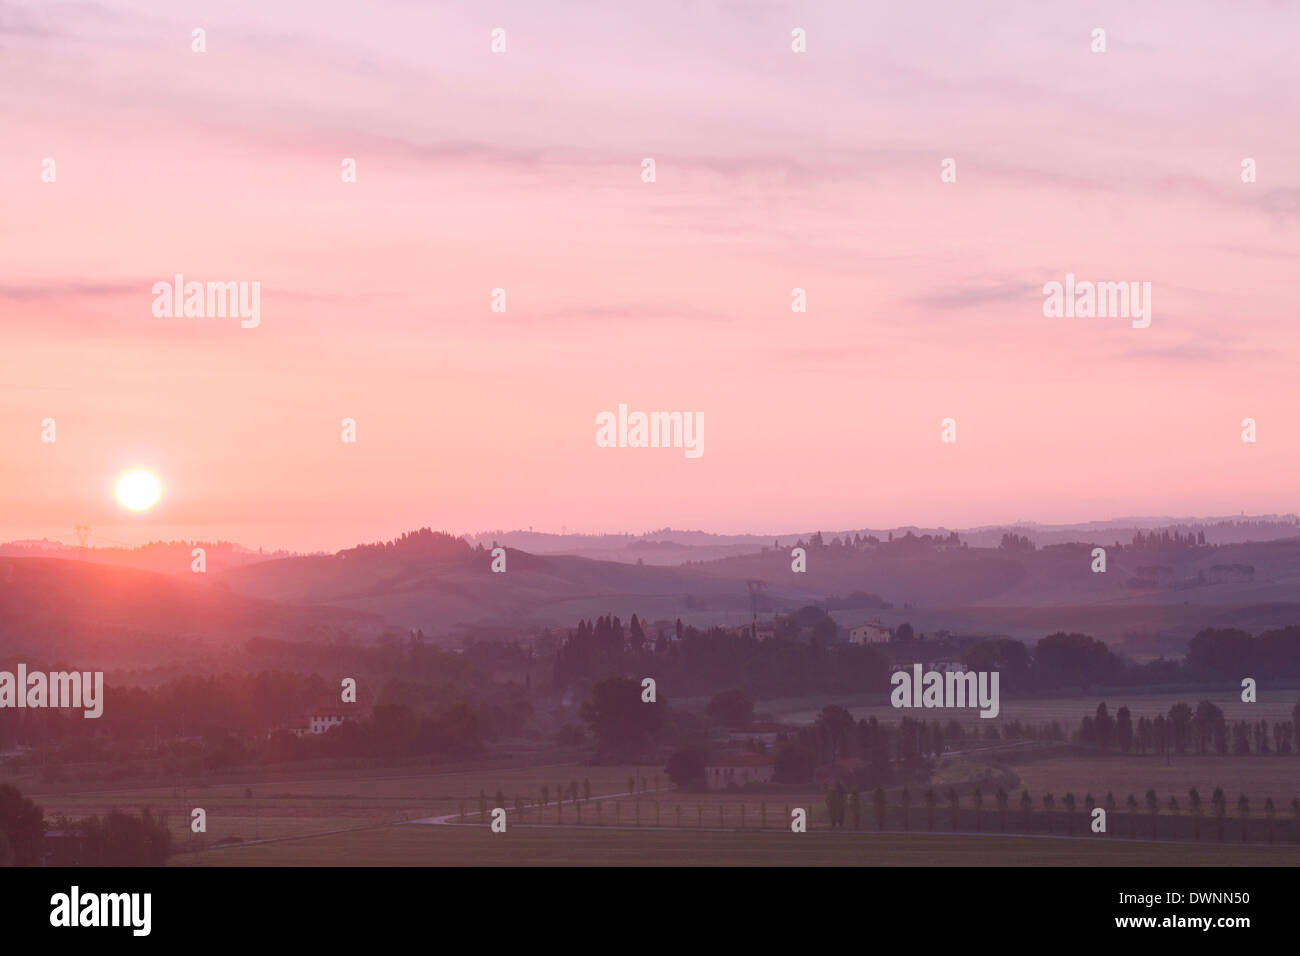 Sunrise, morning atmosphere, Colle di Val d'Elsa, Tuscany, Italy Stock Photo